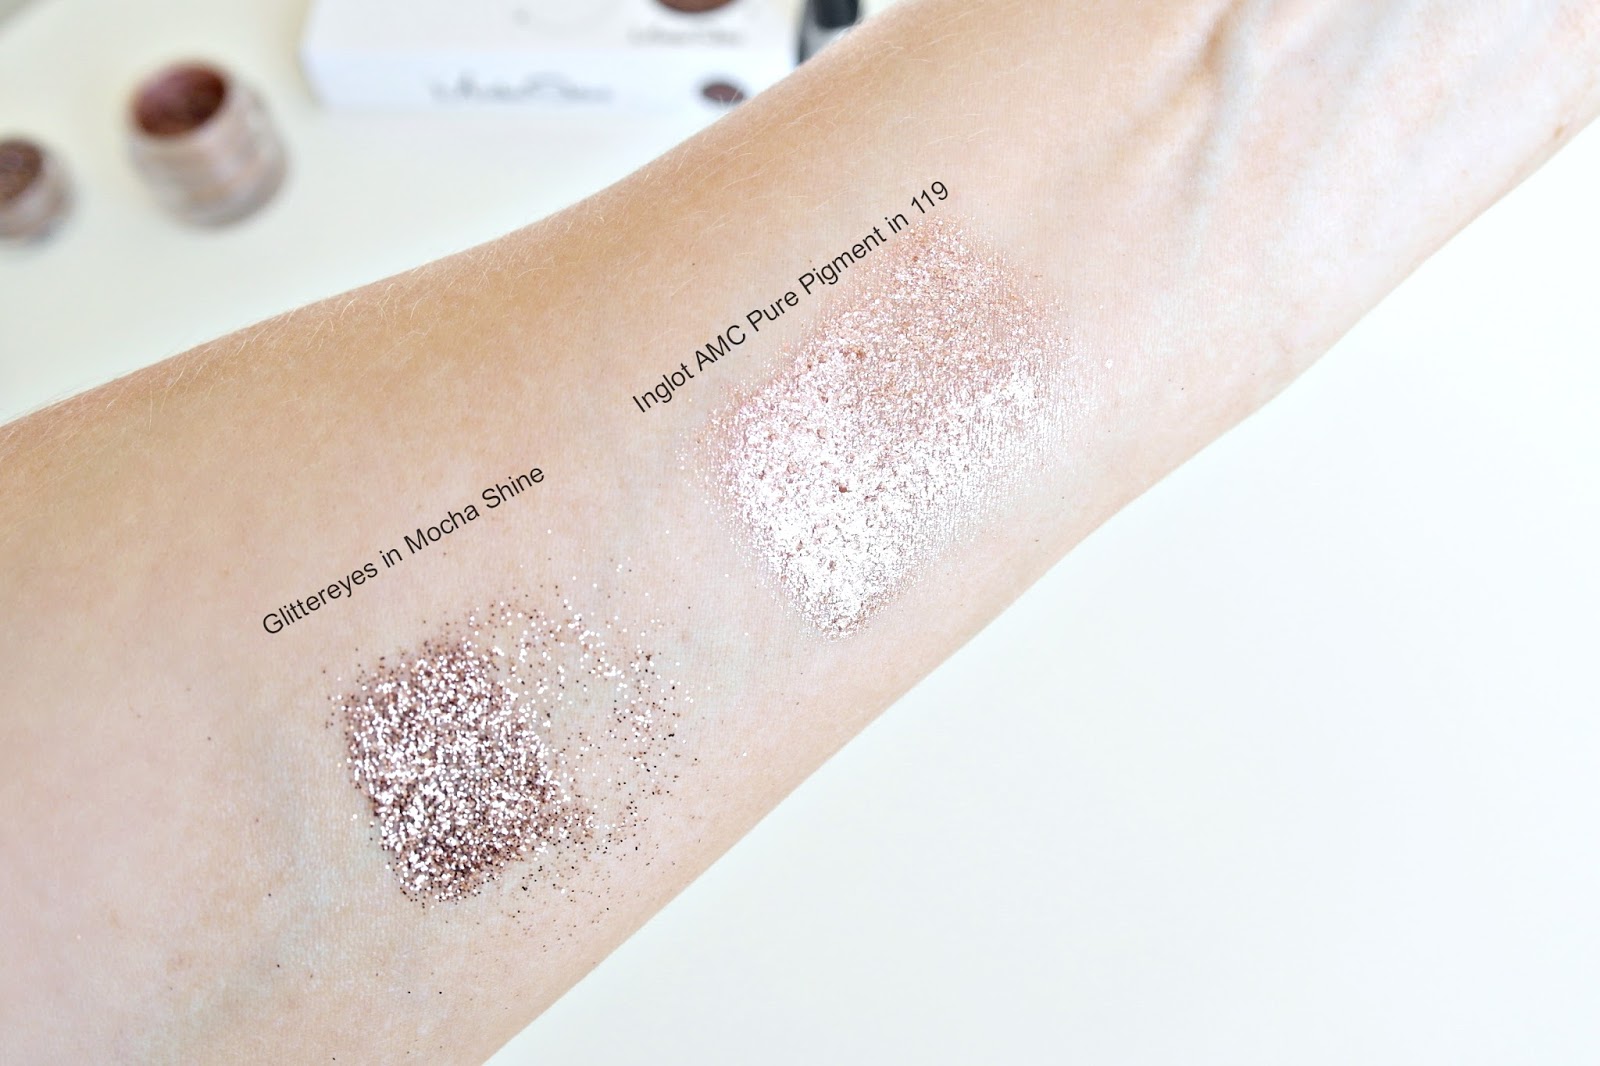 swatches of glittereyes mocha shine and Inglot pigment in 119 